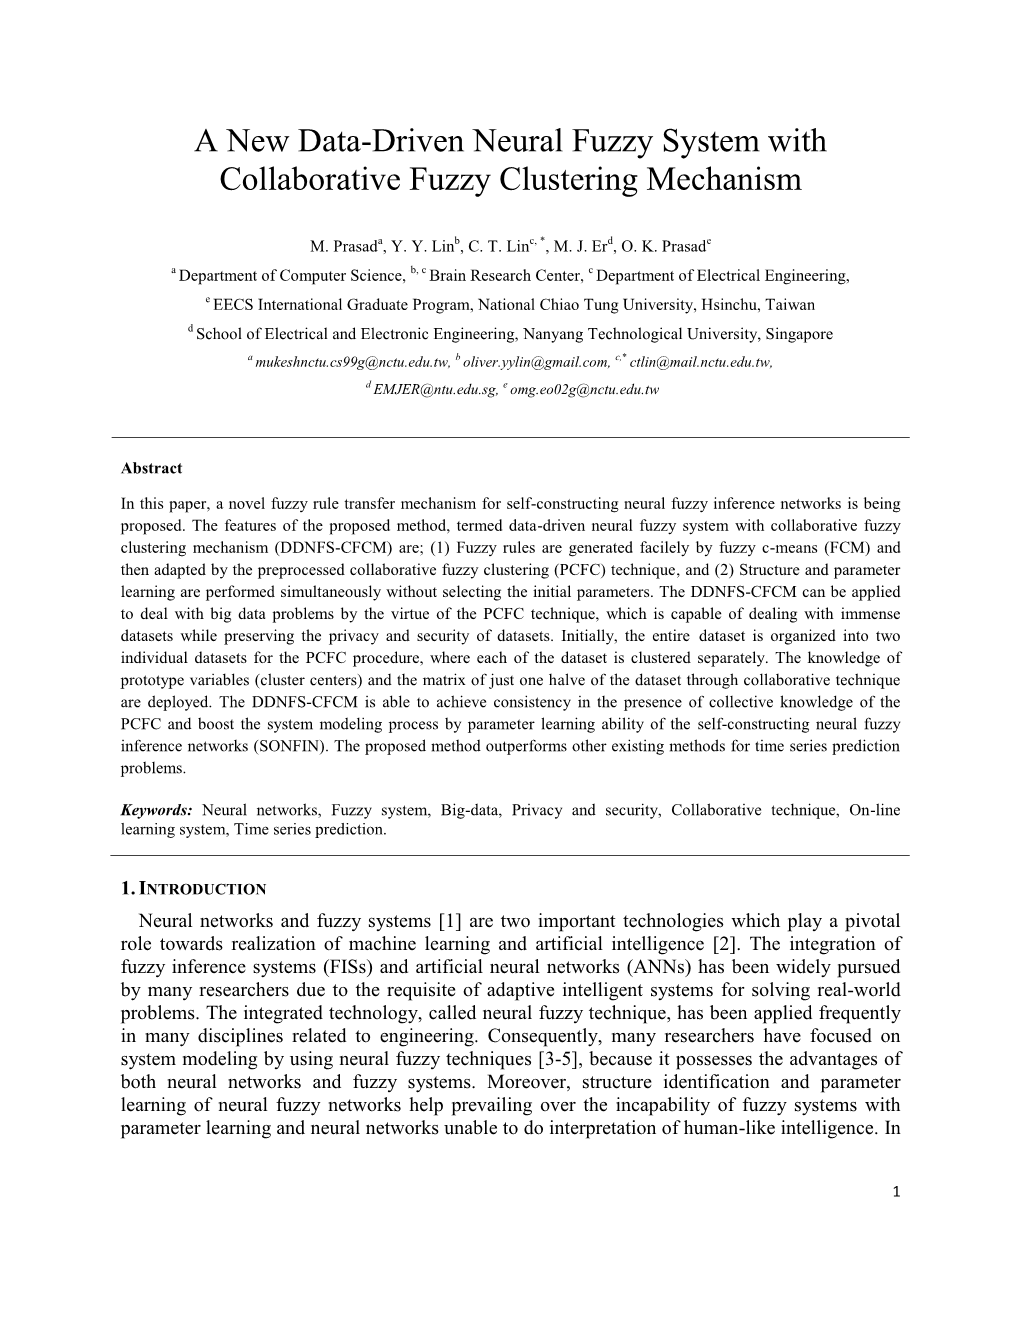 A New Data-Driven Neural Fuzzy System with Collaborative Fuzzy Clustering Mechanism